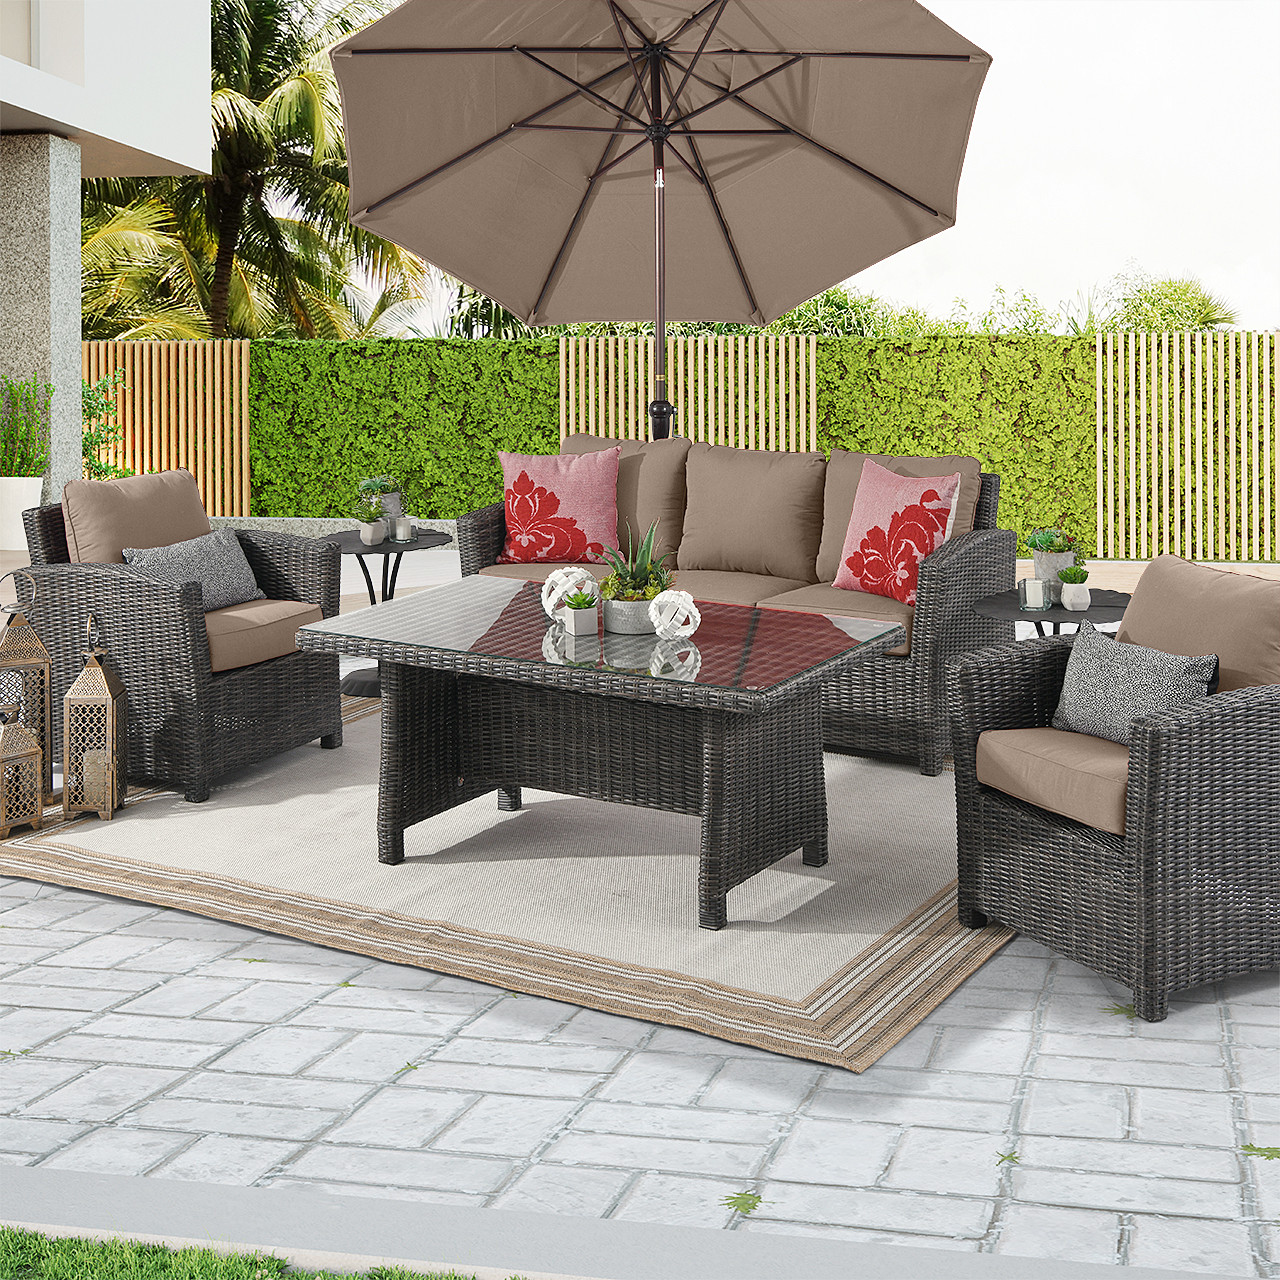 Venice Silver Oak Outdoor Wicker with Cushions 4 Piece Sofa Group + 59 x 32 in. Glass Top Lounge Table